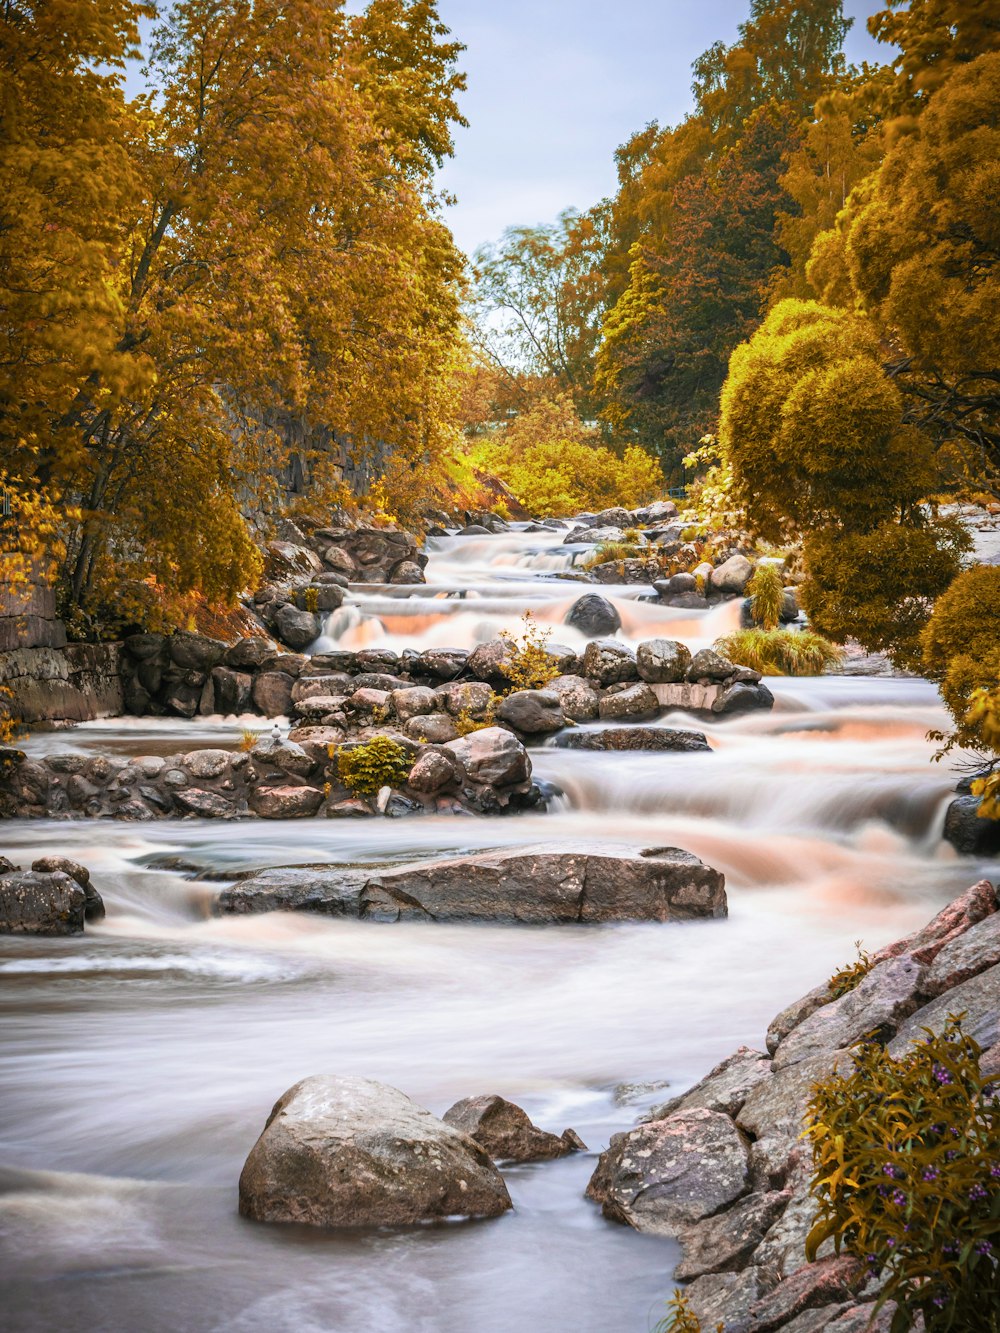 rocky river with trees in both banks